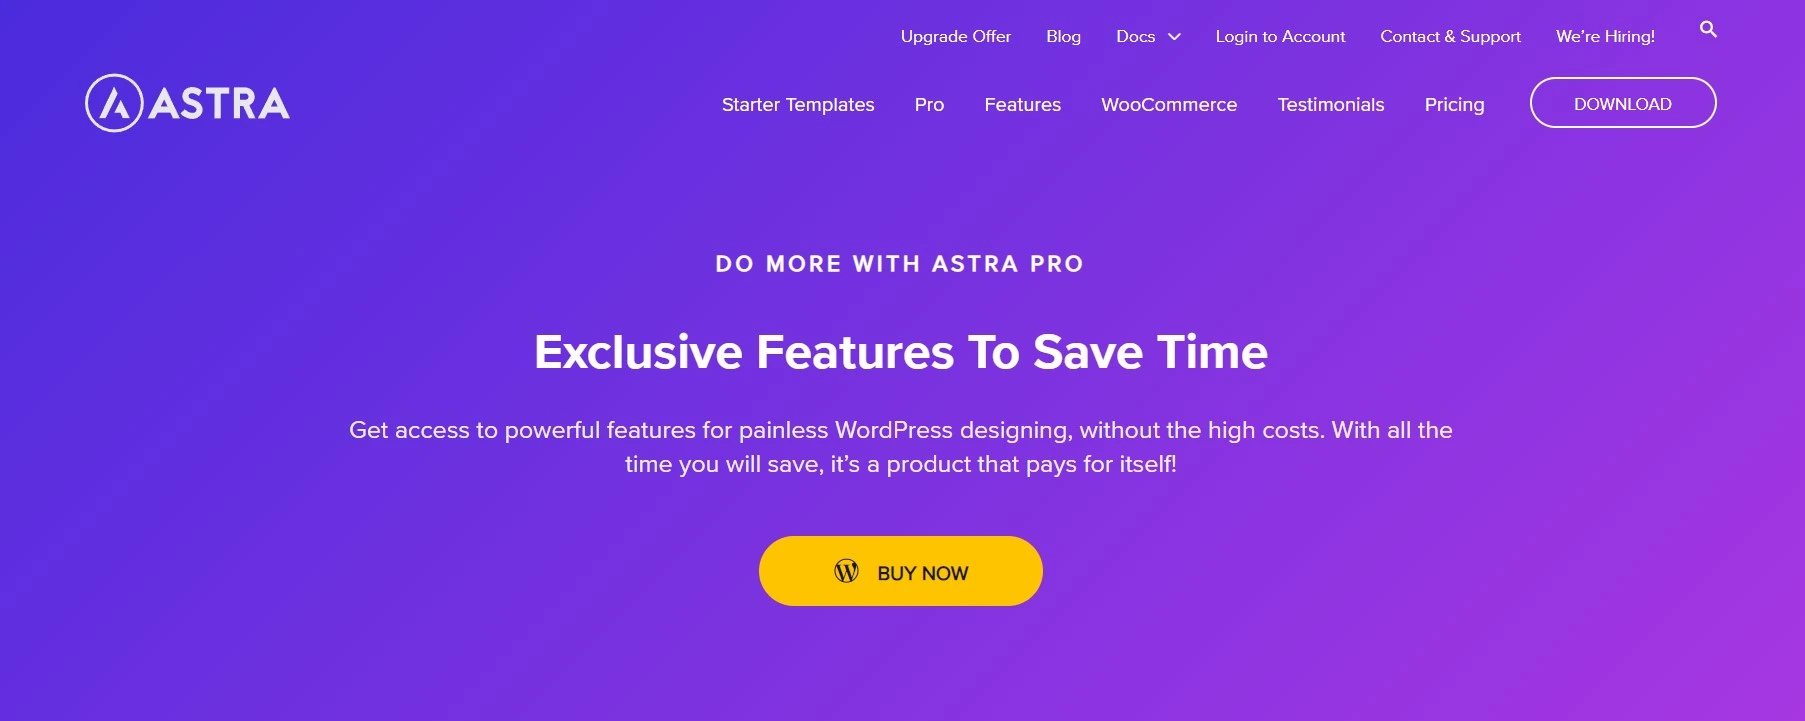 Astra Pro Is One Of The Best Wordpress Plugins For Agencies